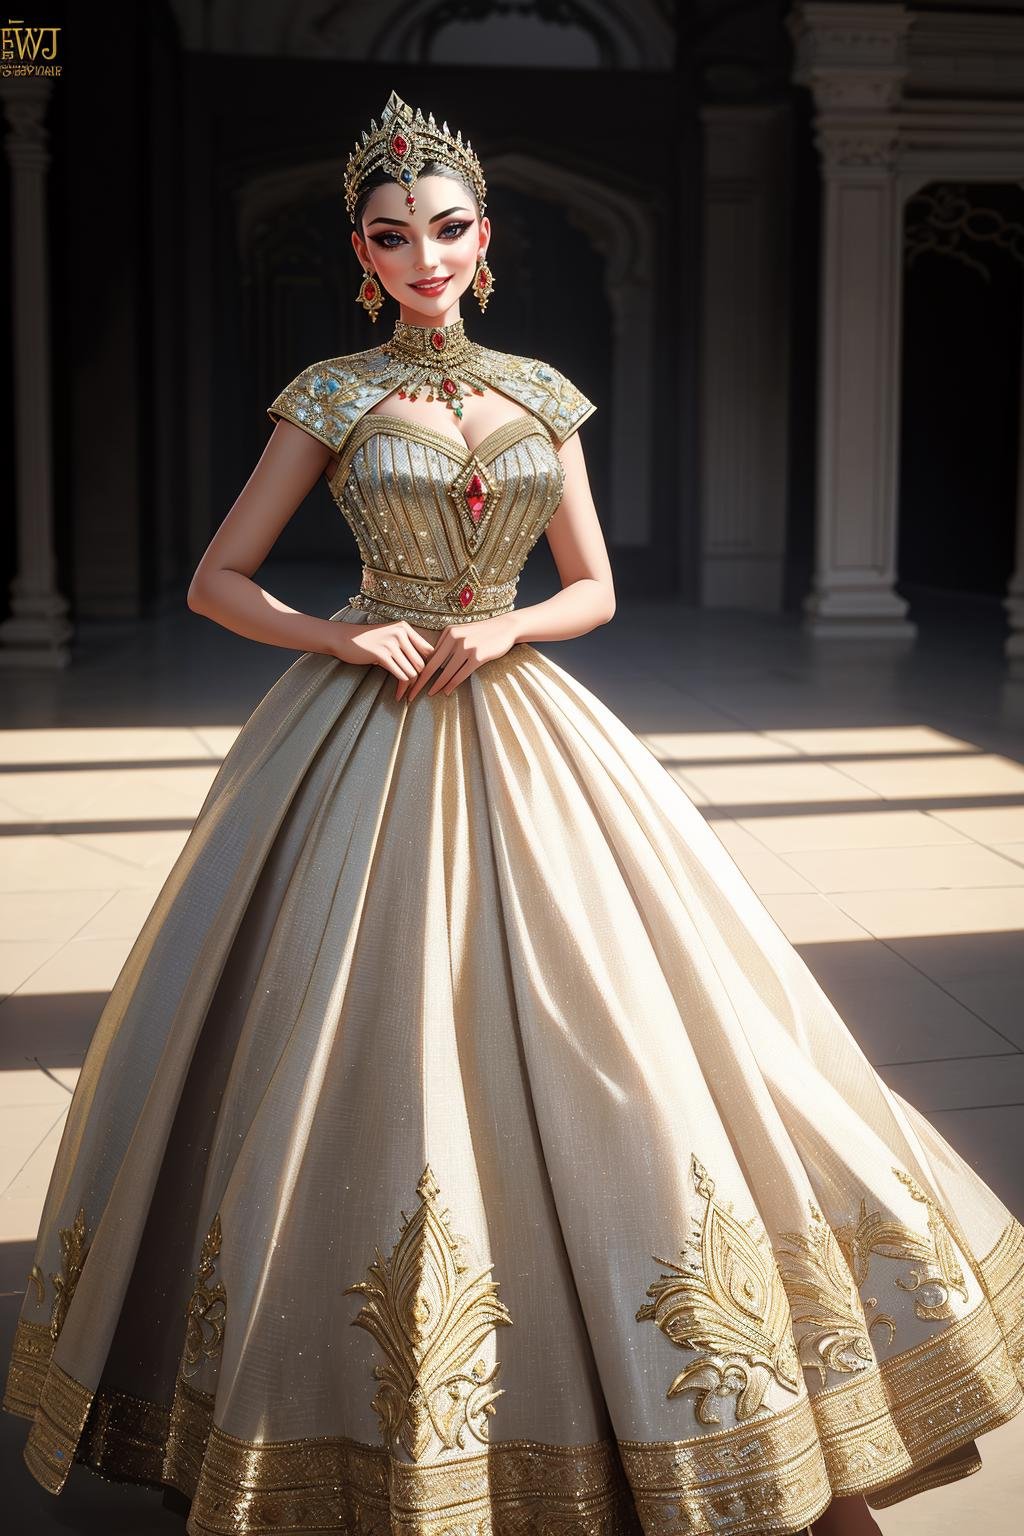 ((Masterpiece, best quality,edgQuality)),smile,smirk,Haute_Couture, edgNath,a woman posing for a picture,wearing a (Haute_Couture,edgBW fashion) designer dress with edgNath_jewelry <lora:edgBollywoodLycoris:1>